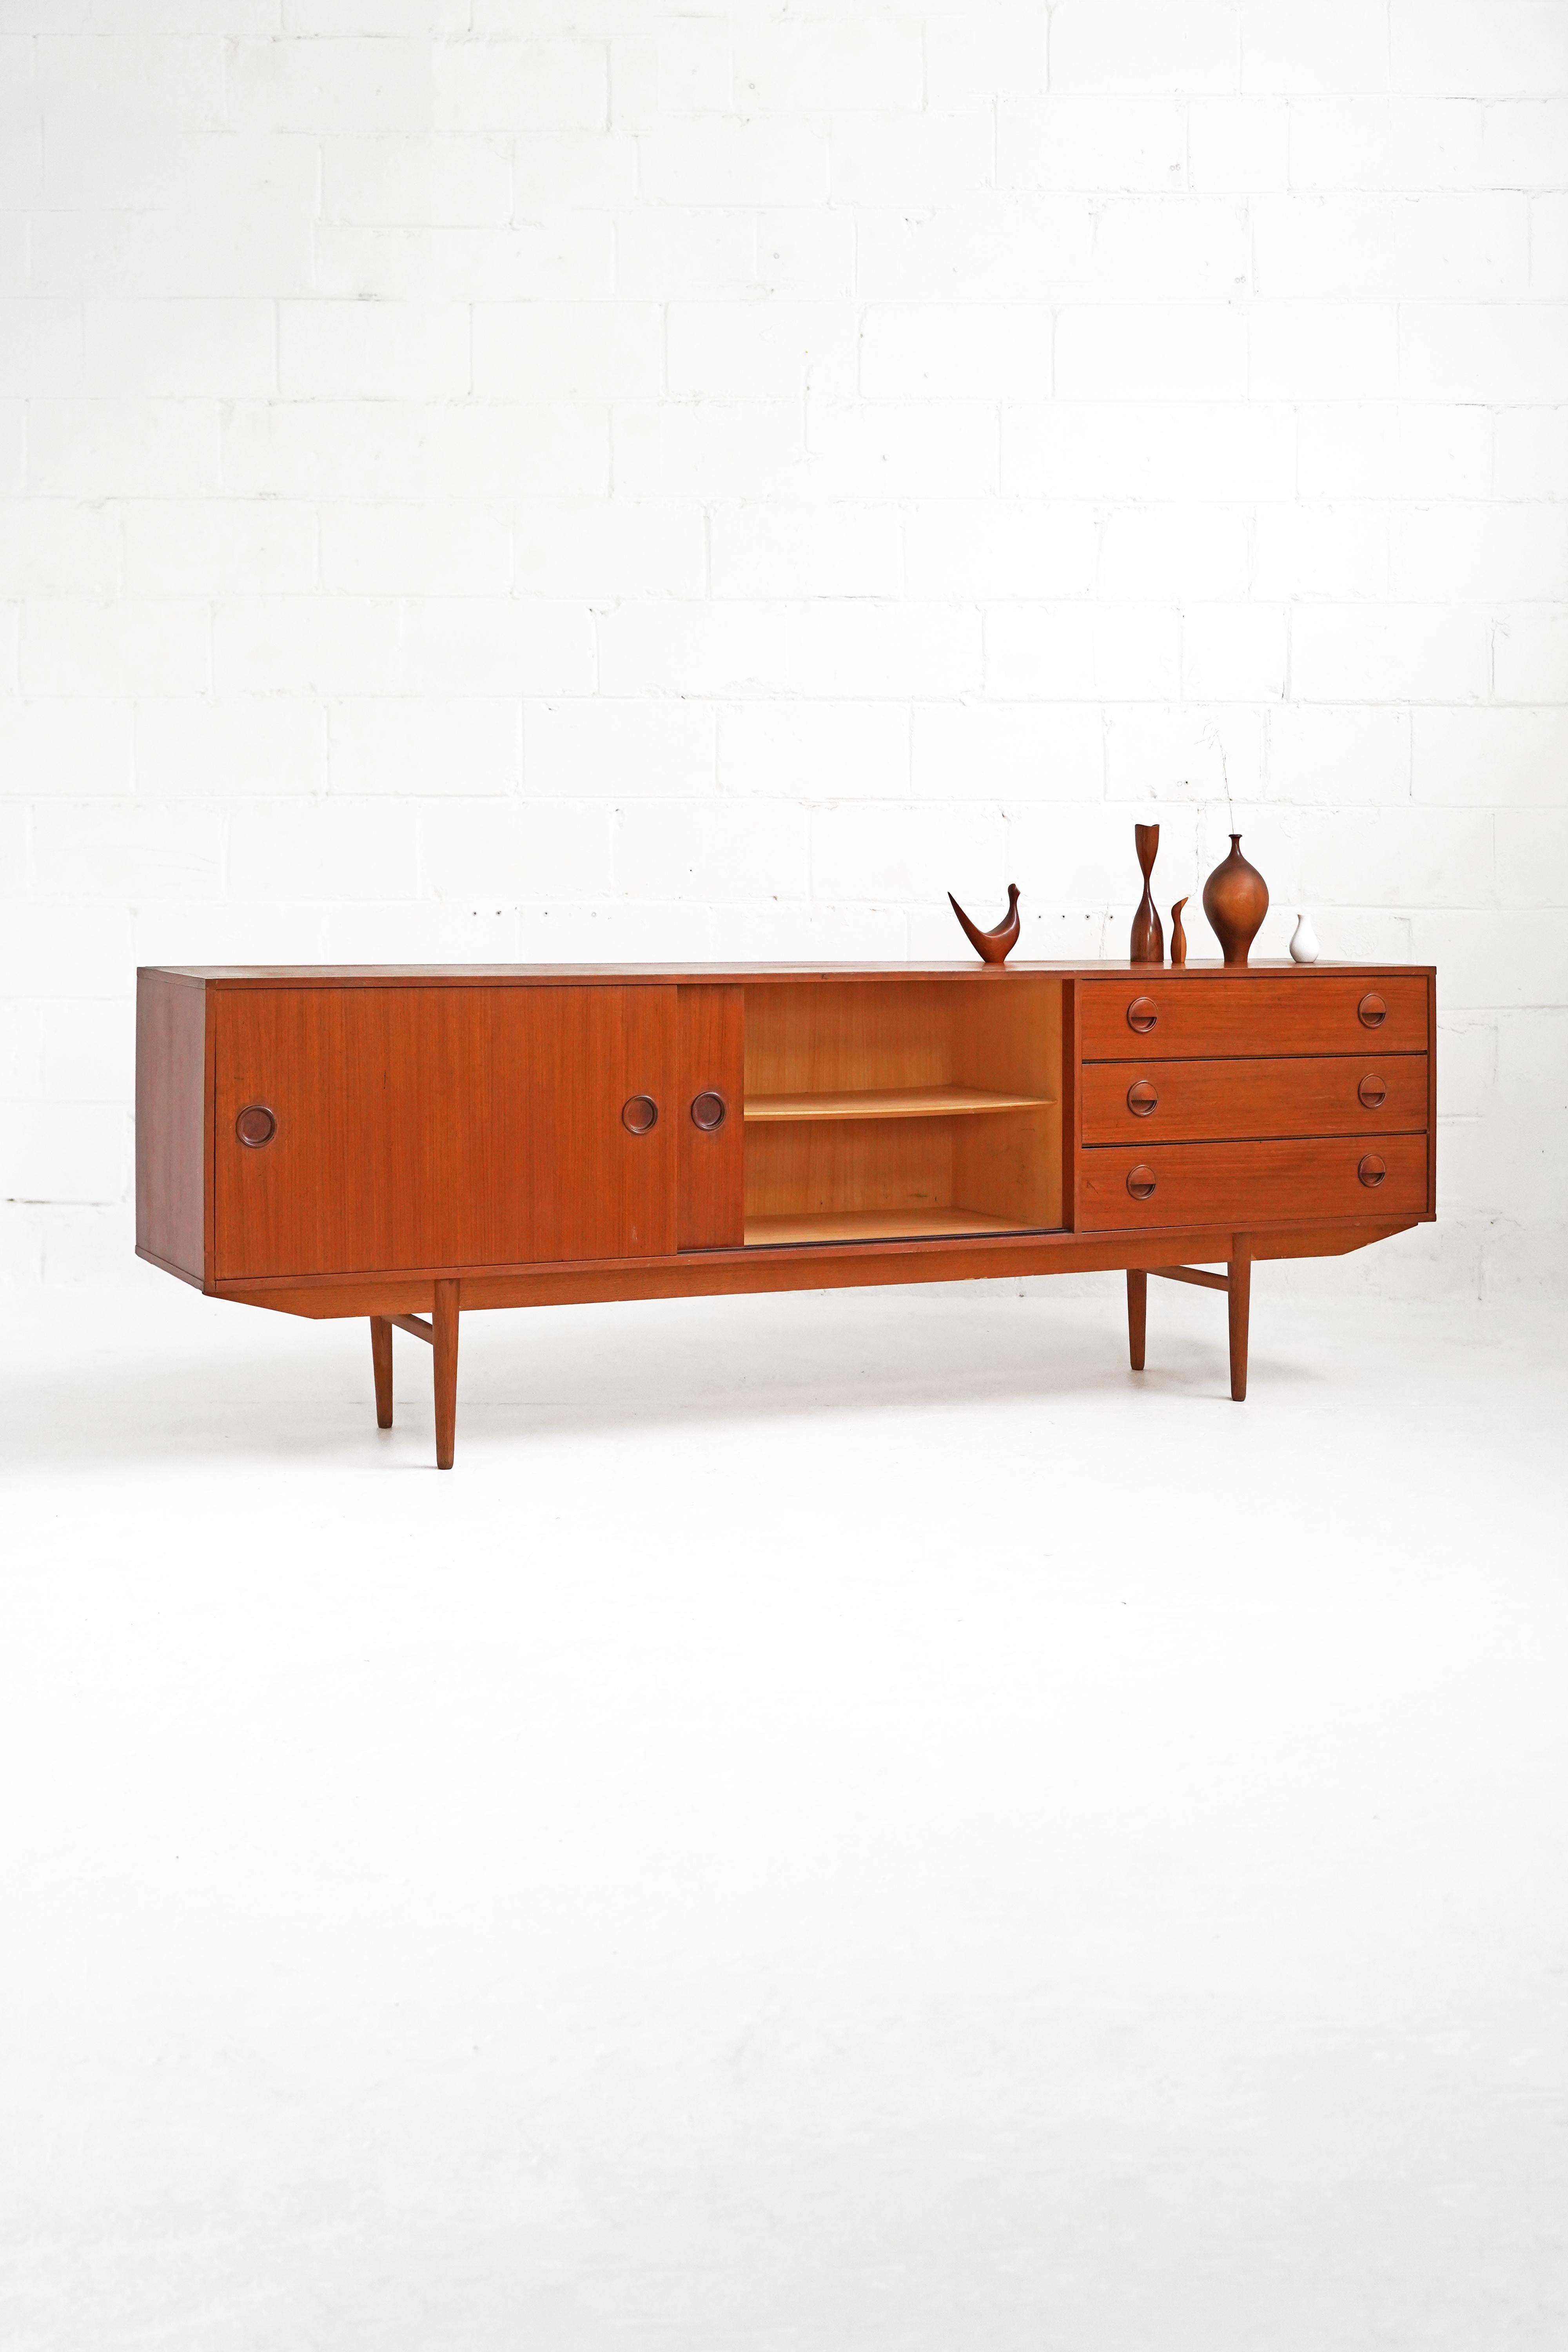 Stunning sideboard for Fristho Franeker, with 2 sliding doors, 3 drawers, and 1 hidden pull out shelf behind left door. In good vintage original condition with general wear throughout the piece, showing minor fading, light scratching and faint